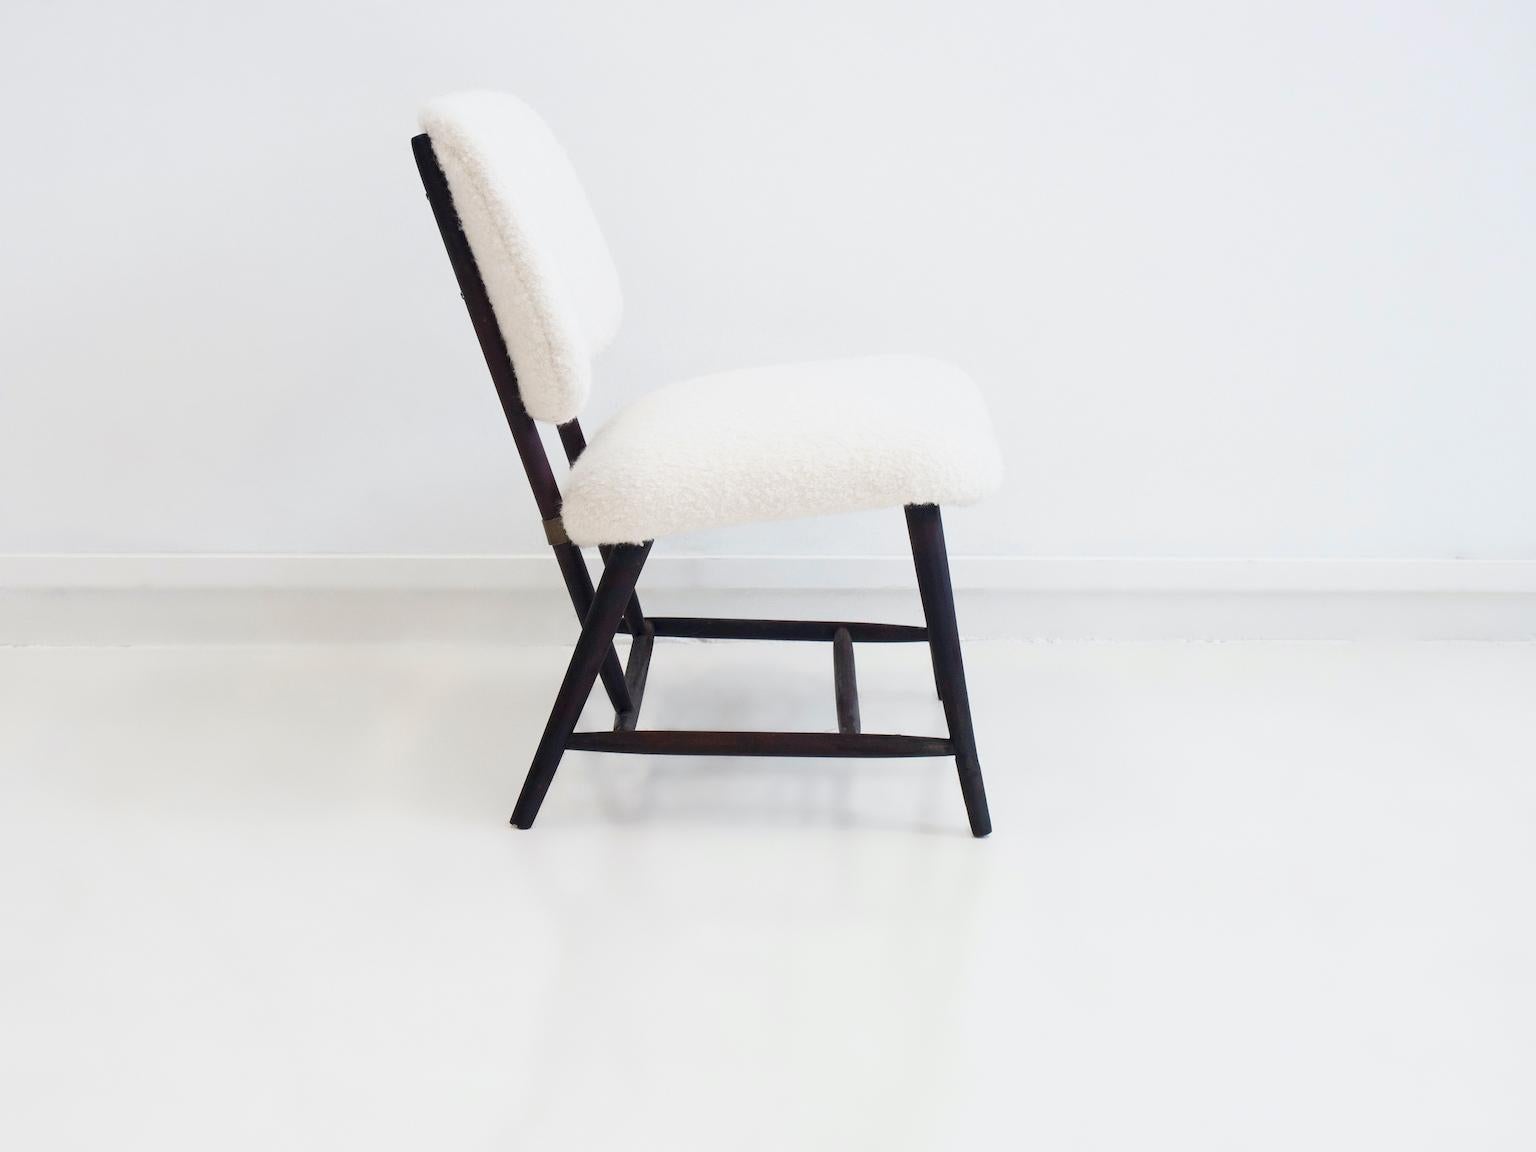 Brass Alf Svensson TeVe Wooden Chair with White Bouclé Fabric Upholstery